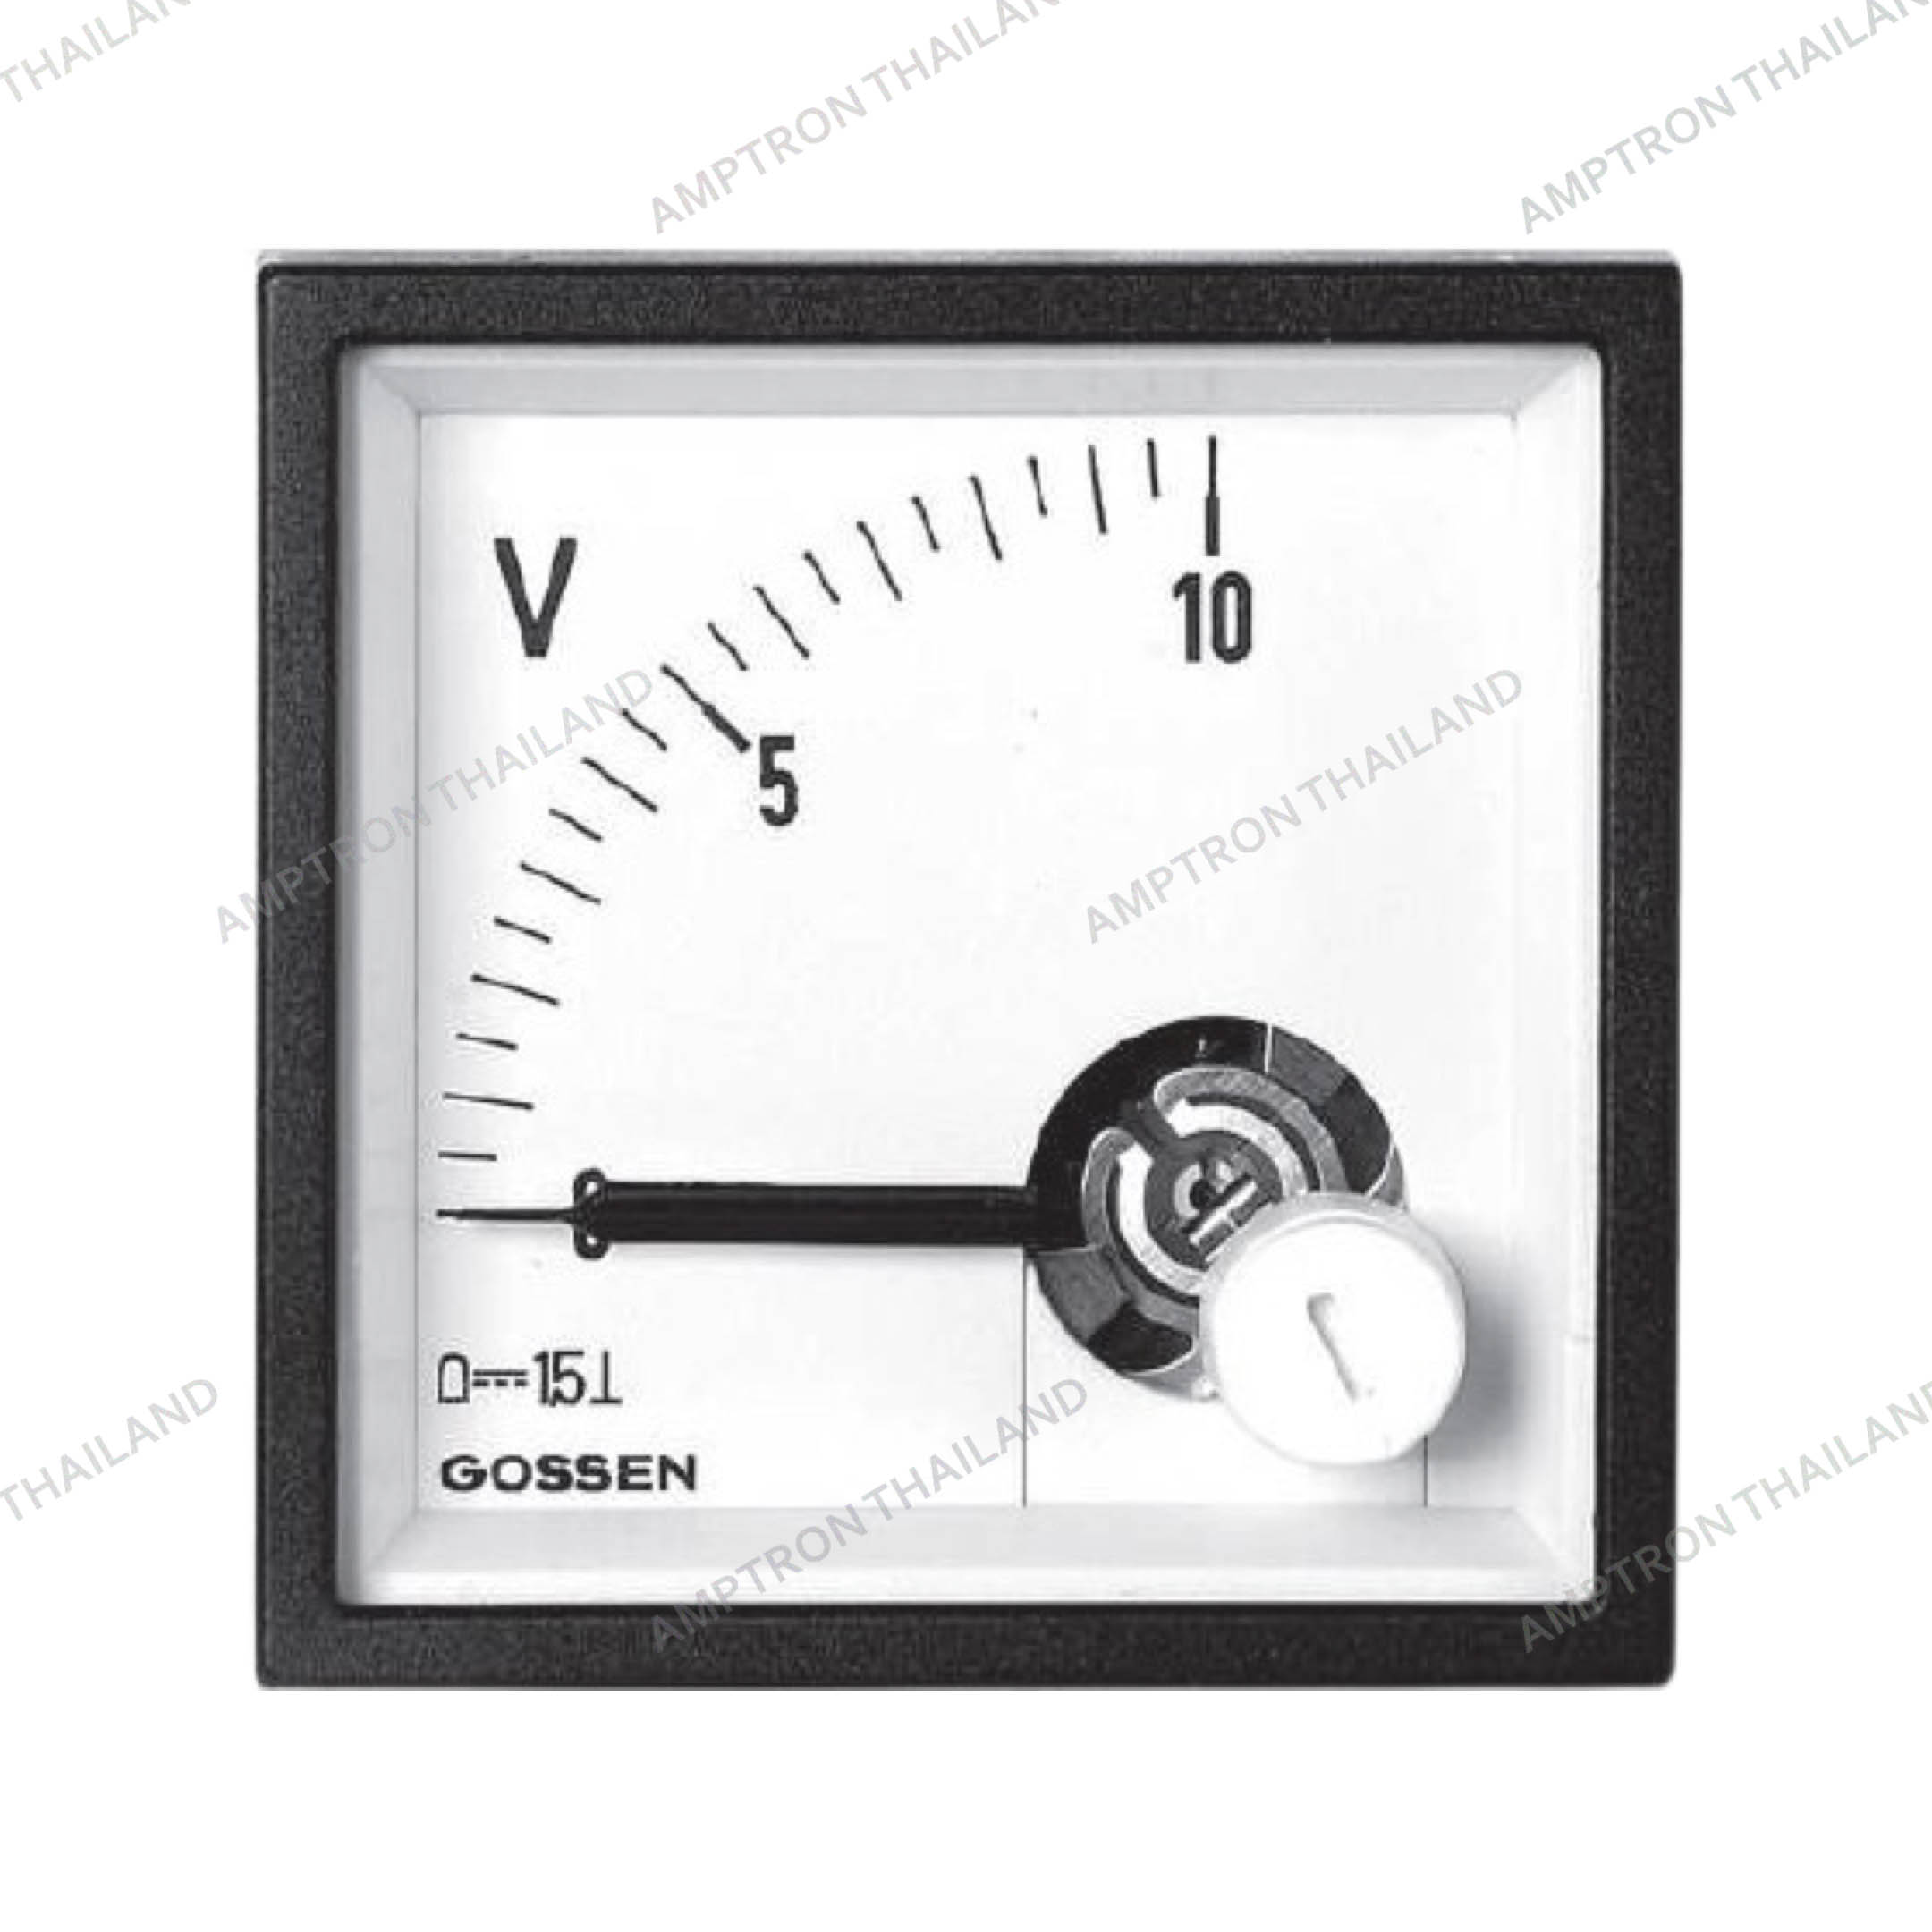 Moving-Coil Panel Meters for direct Current or Voltage, 90° Scale (PQS/V-PQS)